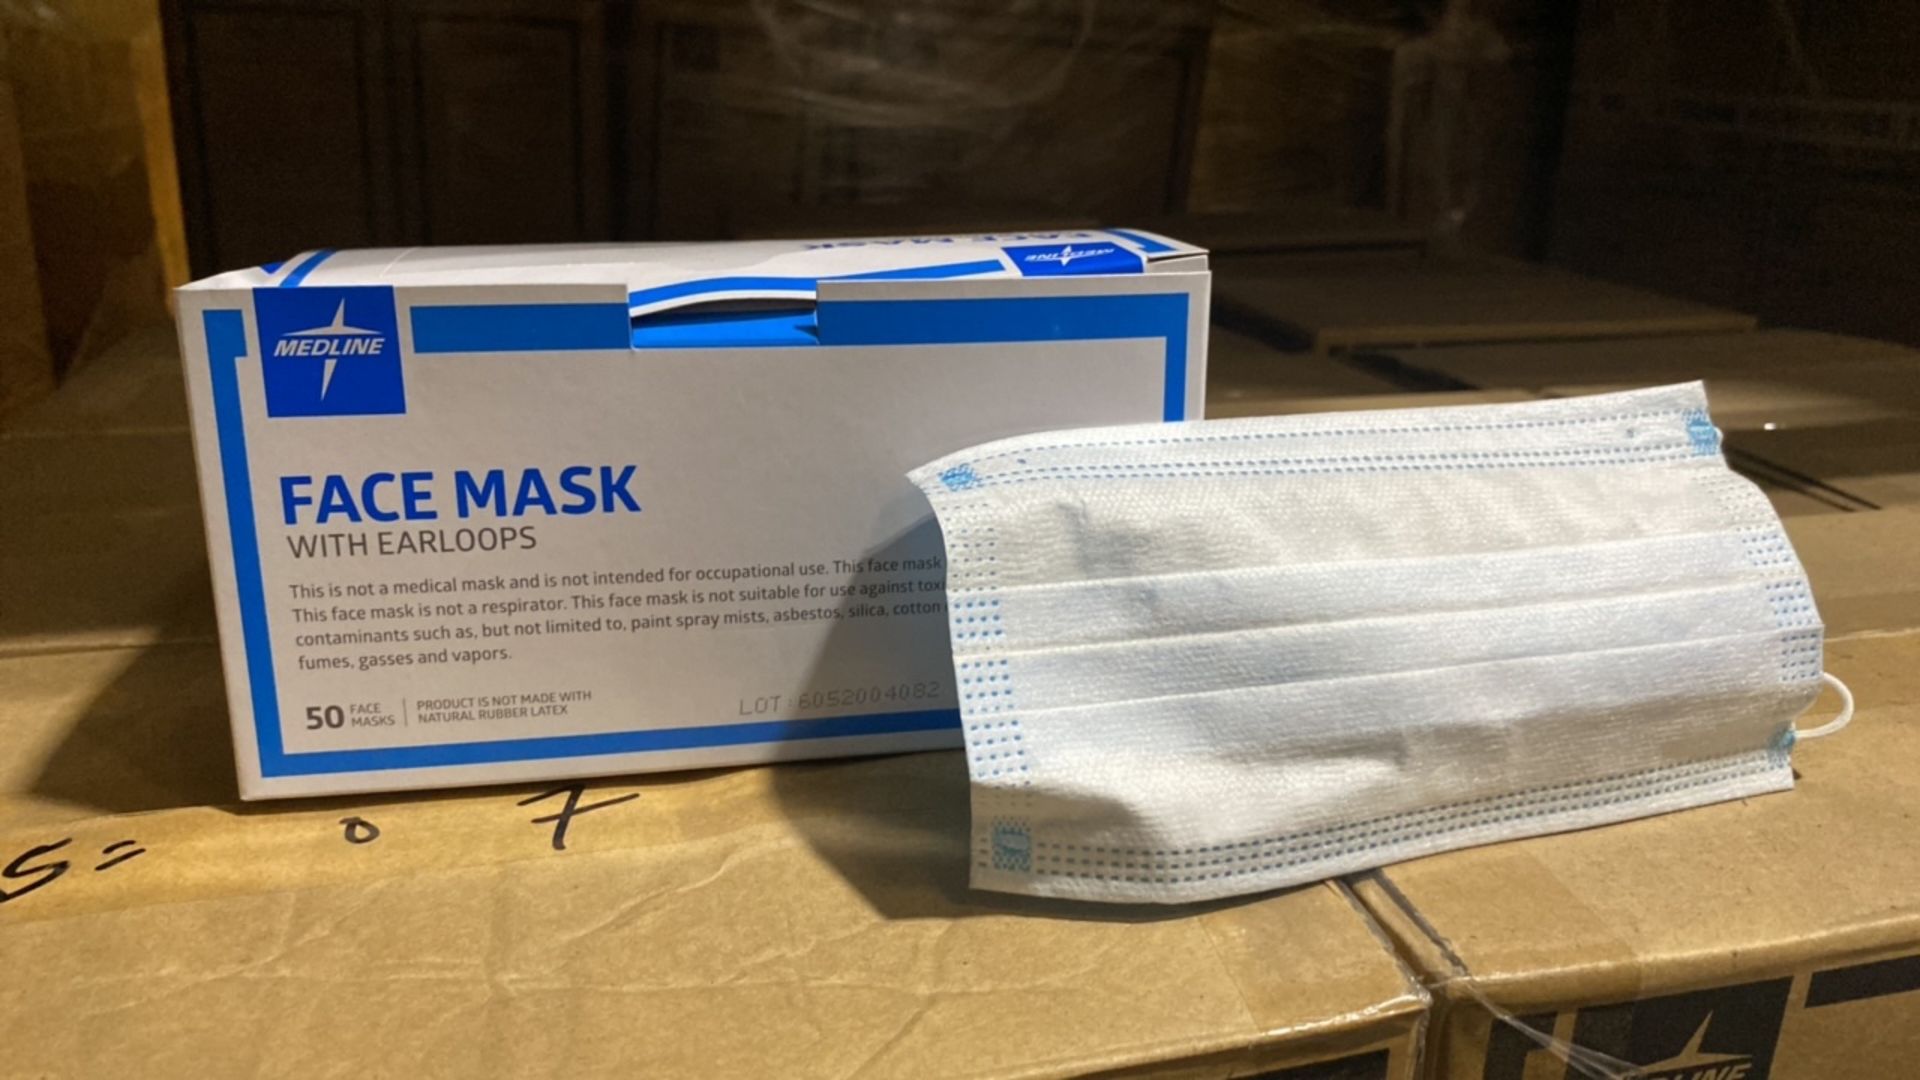 MEDLINE NON27373 NON-MEDICAL EARLOOP FACE MASK QTY:29100 UNITS